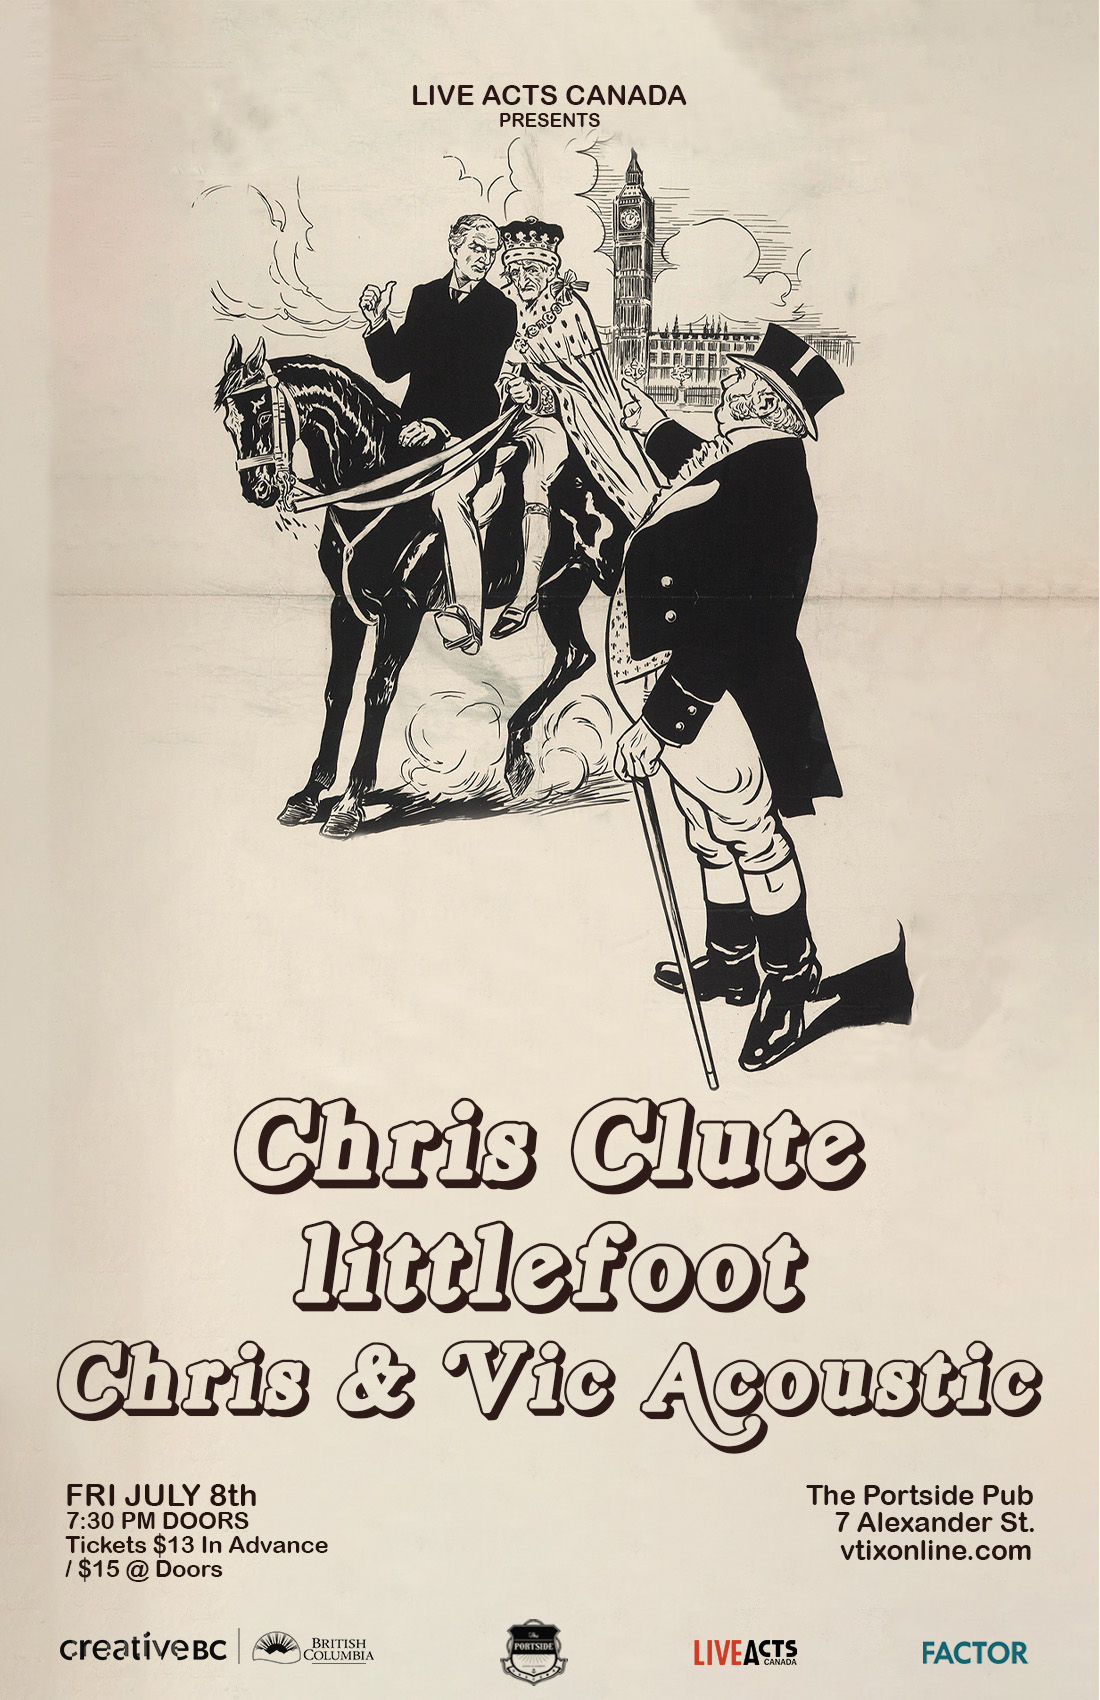 Chris Clute with Special Guests Littlefoot, and Chris & Vic Acoustic